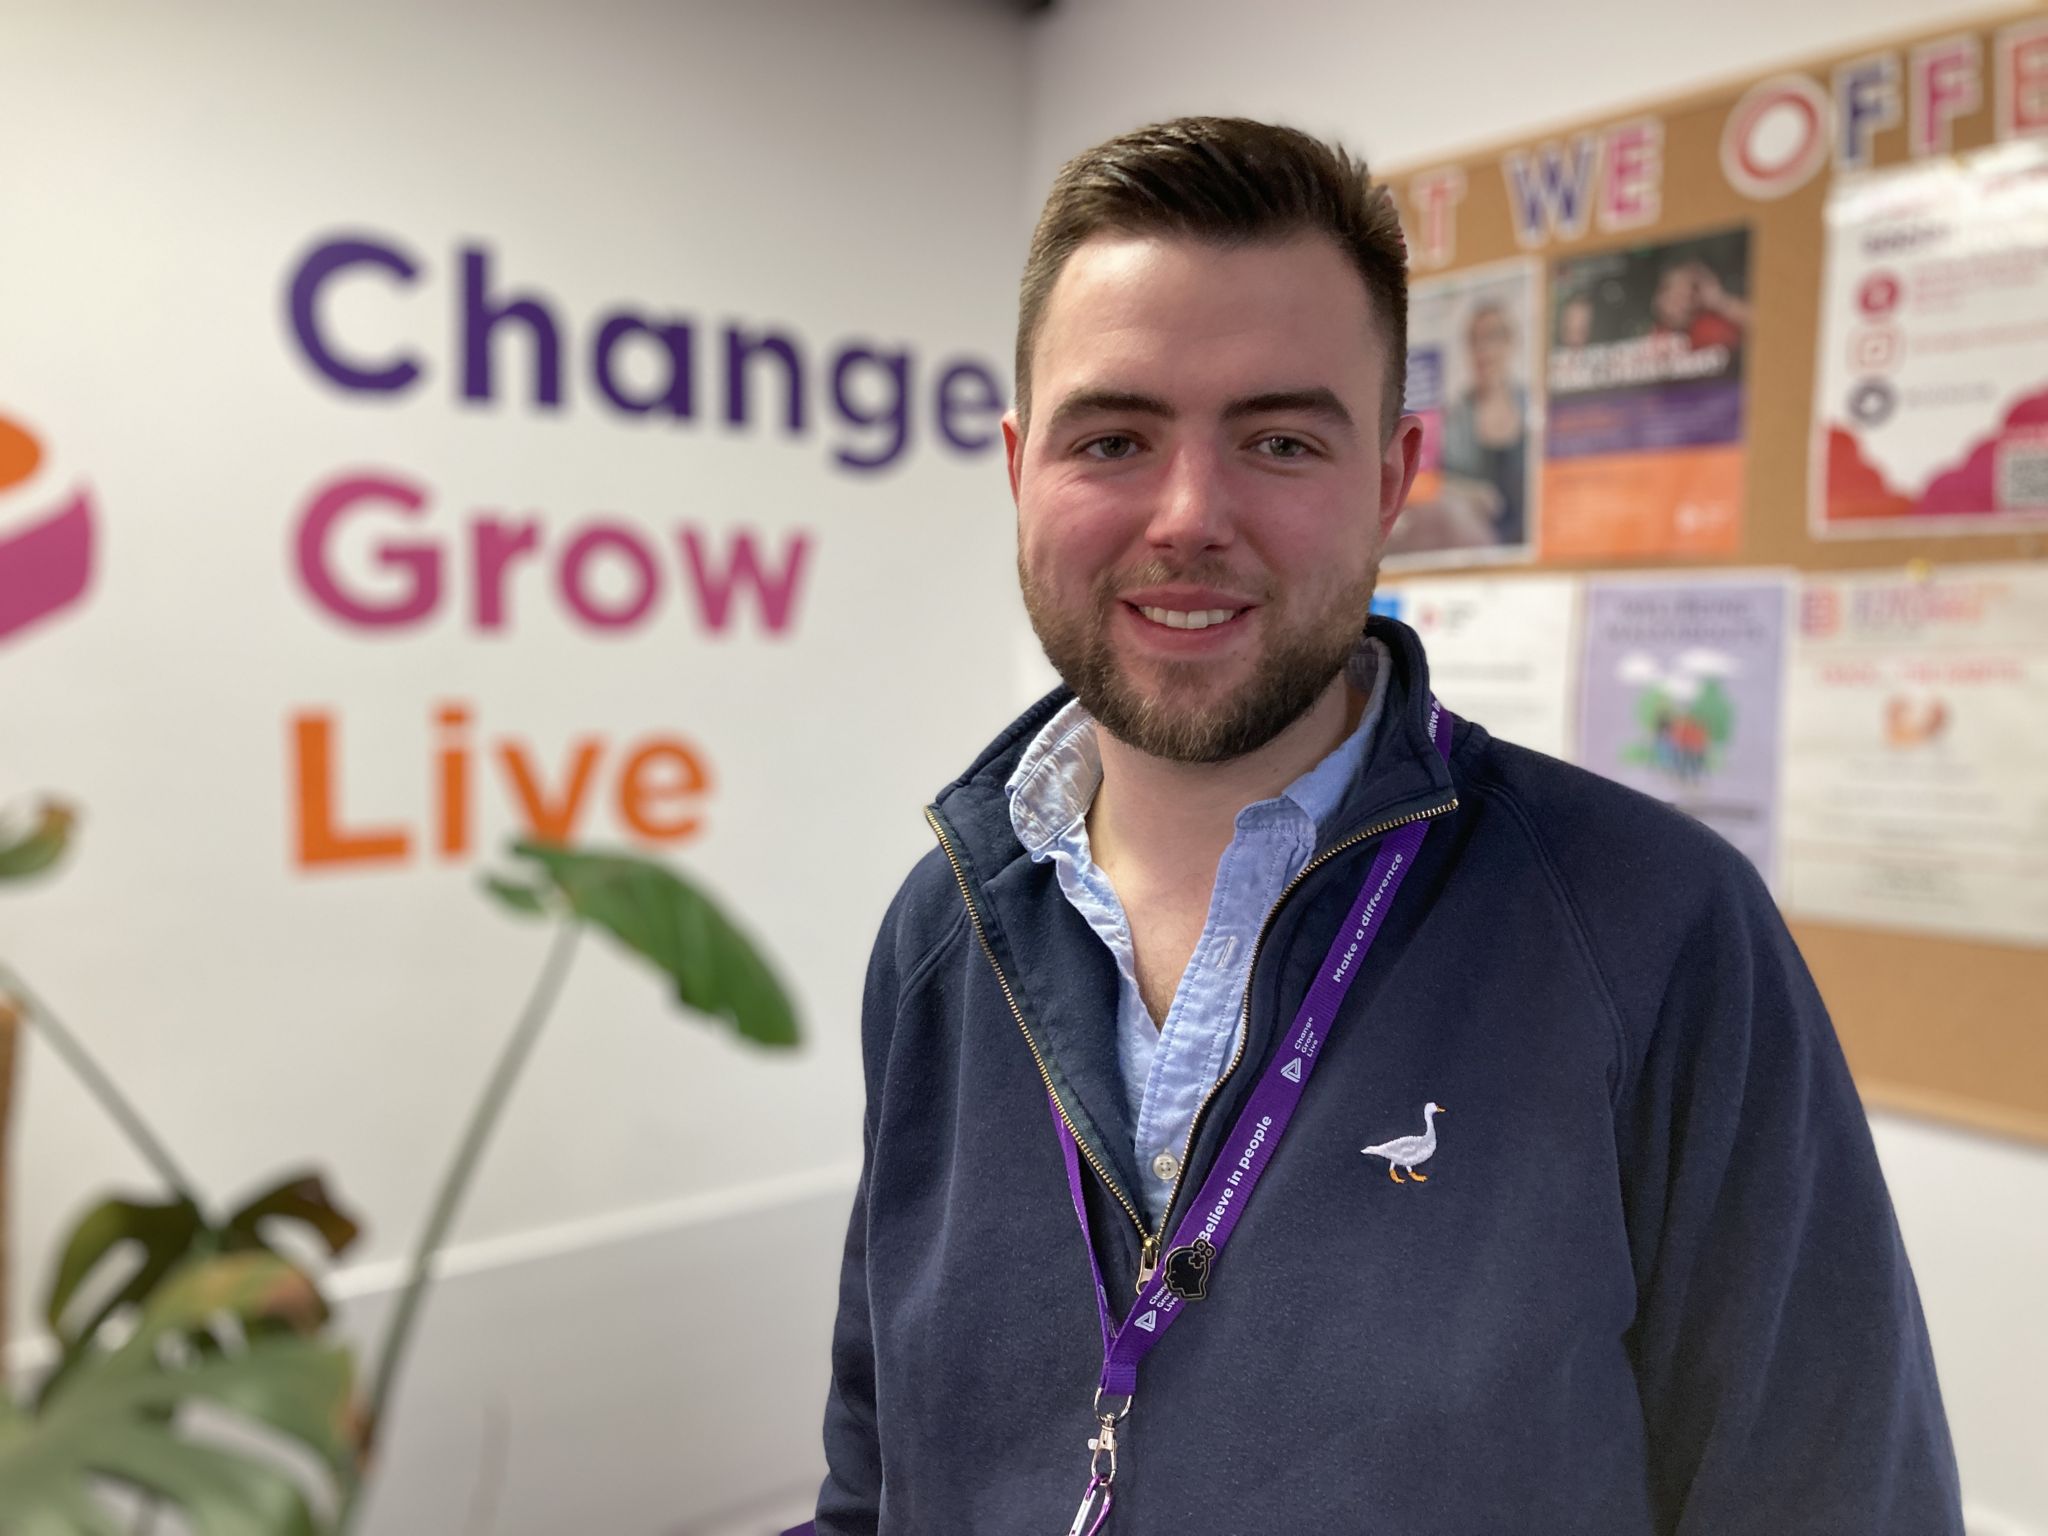 Jack Cross in front of Change Grow Live sign